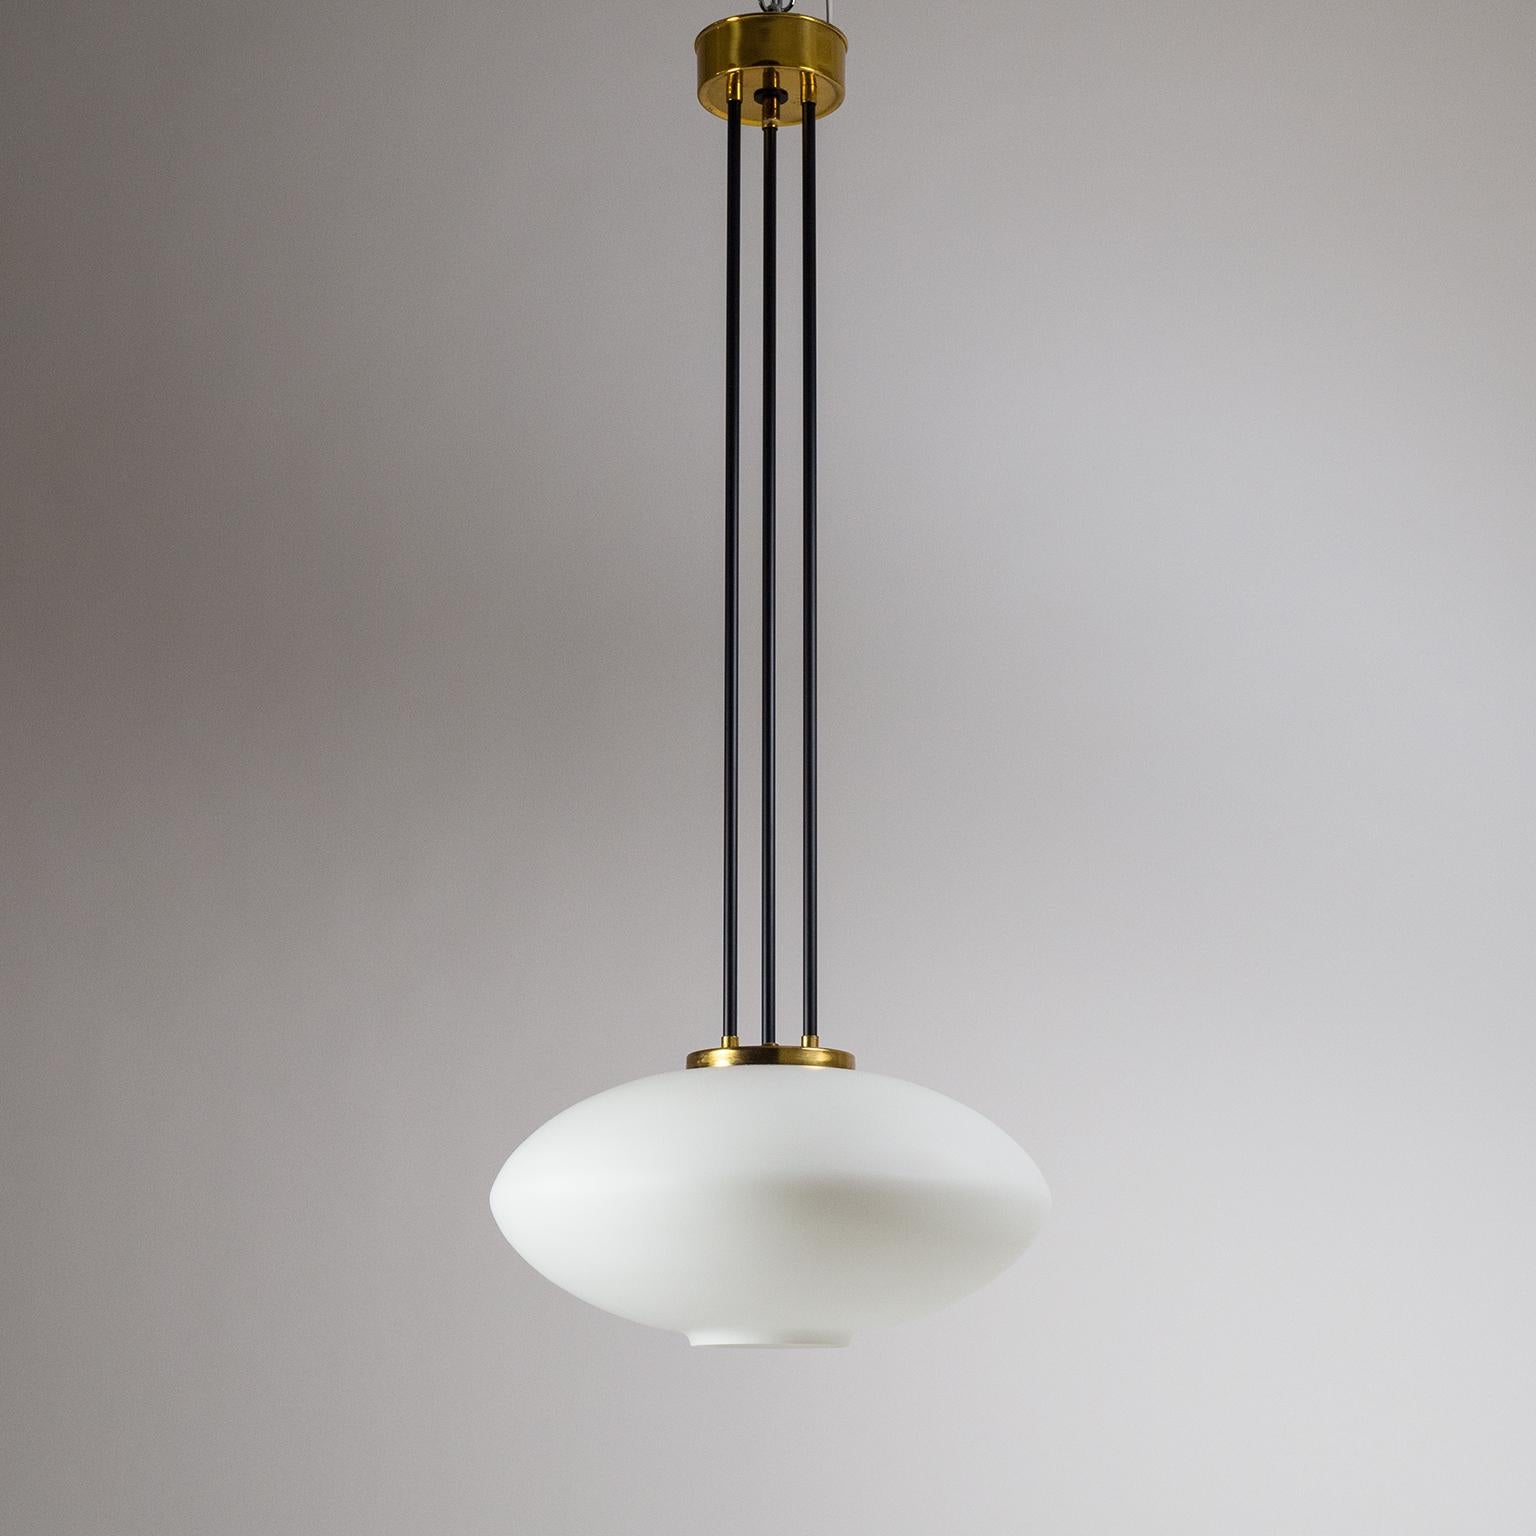 Remarkable modernist Stilnovo pendant/chandelier from the early 1960s. In typical Stilnovo manner the large glass body is made of satinated 